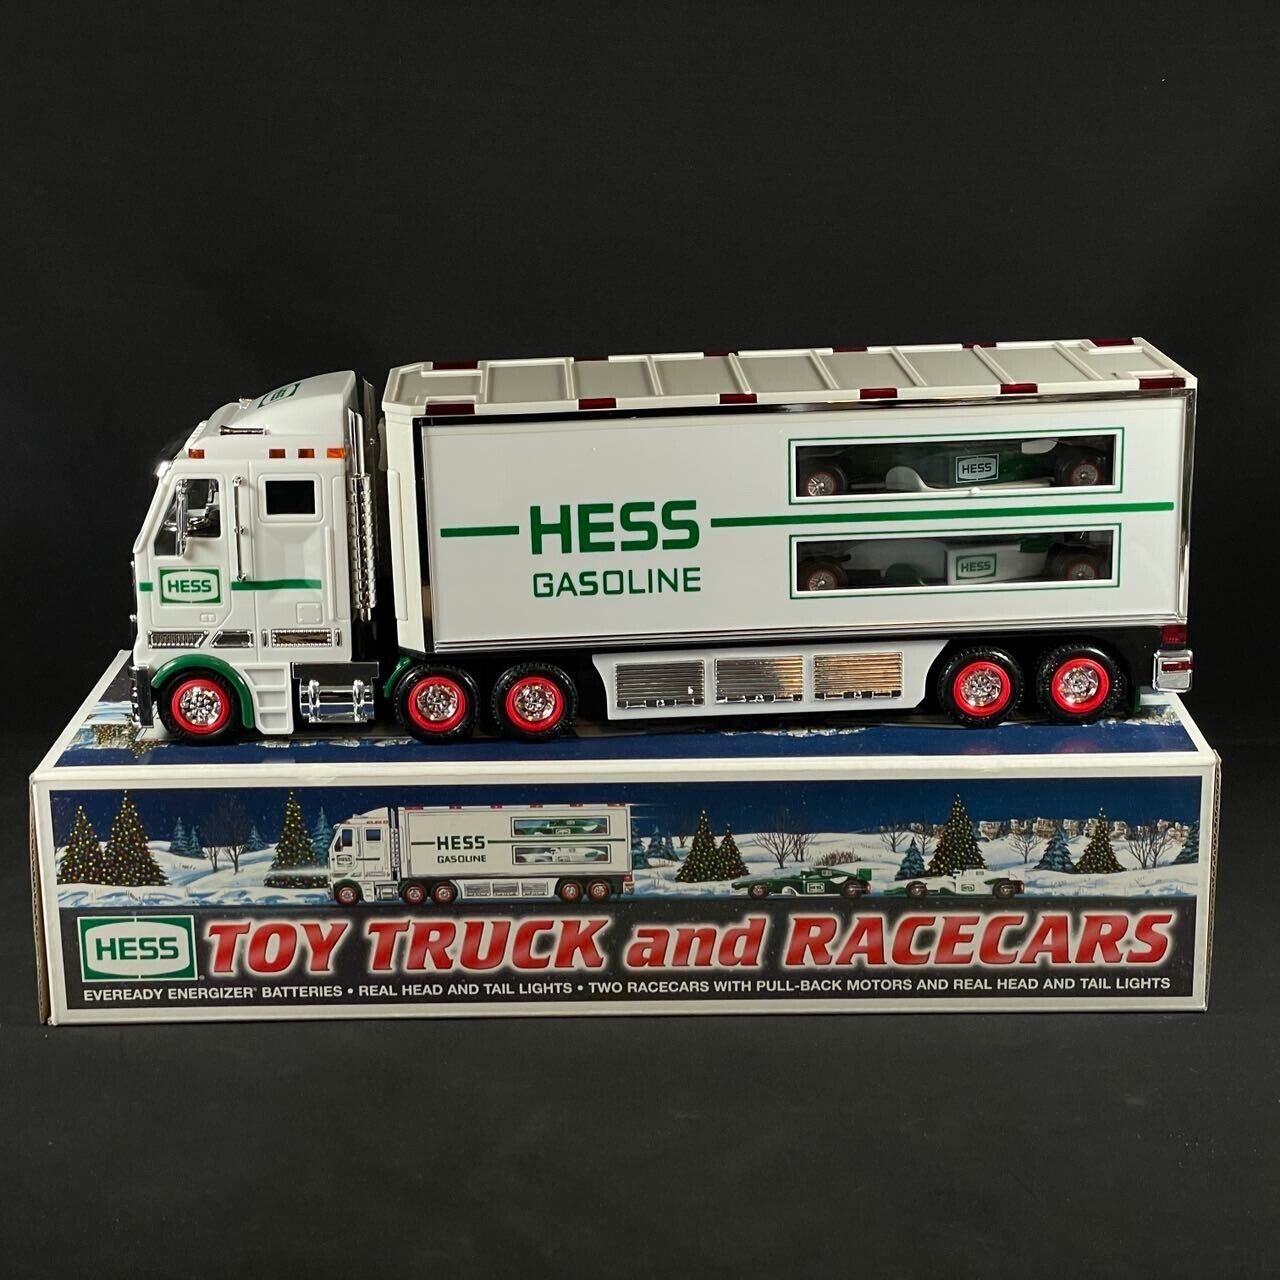 2003 Hess Toy Truck and Racecars - Collectible - NEW IN ORIGINAL BOX